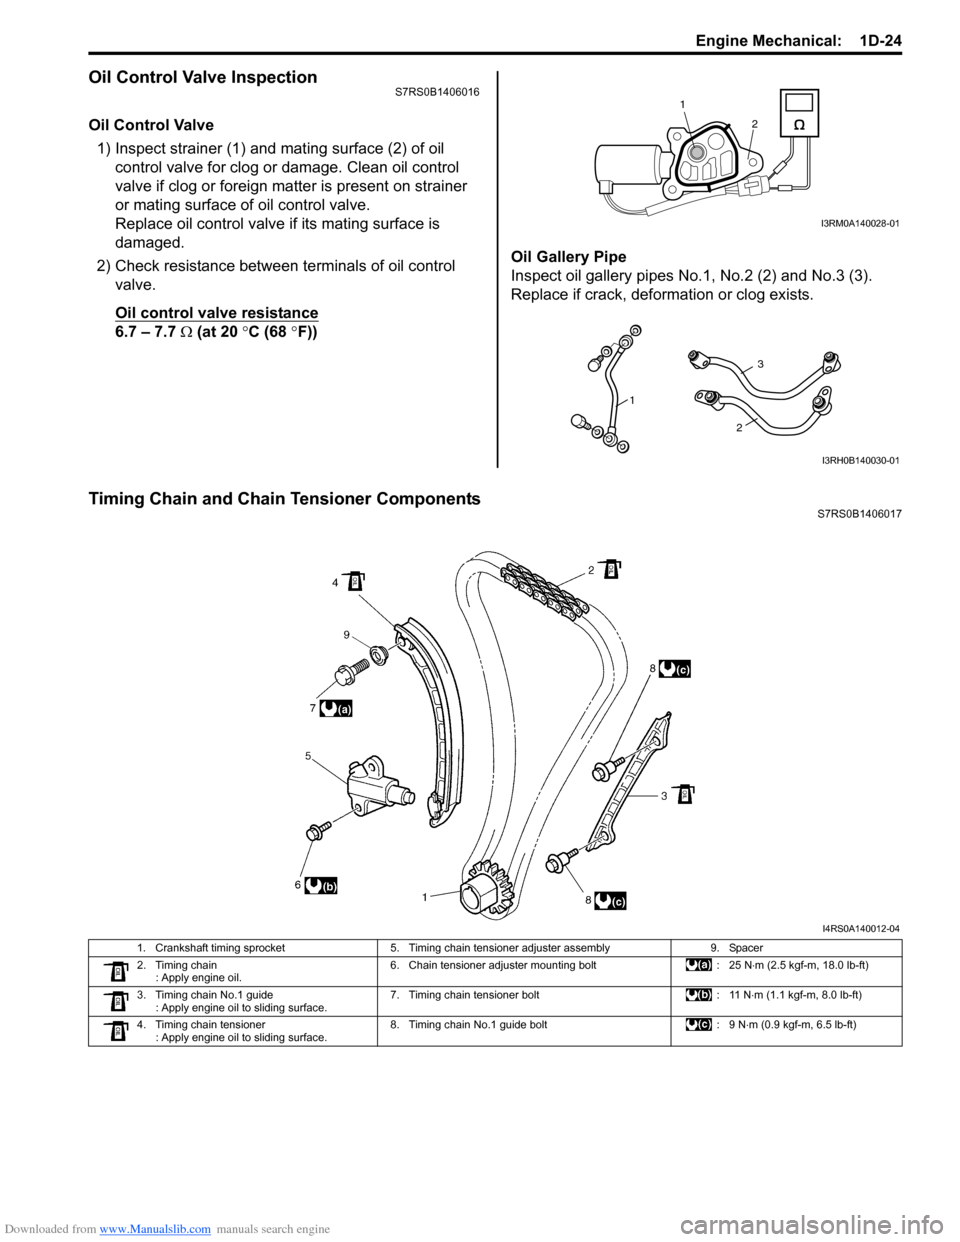 SUZUKI SWIFT 2006 2.G Service Workshop Manual Downloaded from www.Manualslib.com manuals search engine Engine Mechanical:  1D-24
Oil Control Valve InspectionS7RS0B1406016
Oil Control Valve1) Inspect strainer (1) and mating surface (2) of oil  con